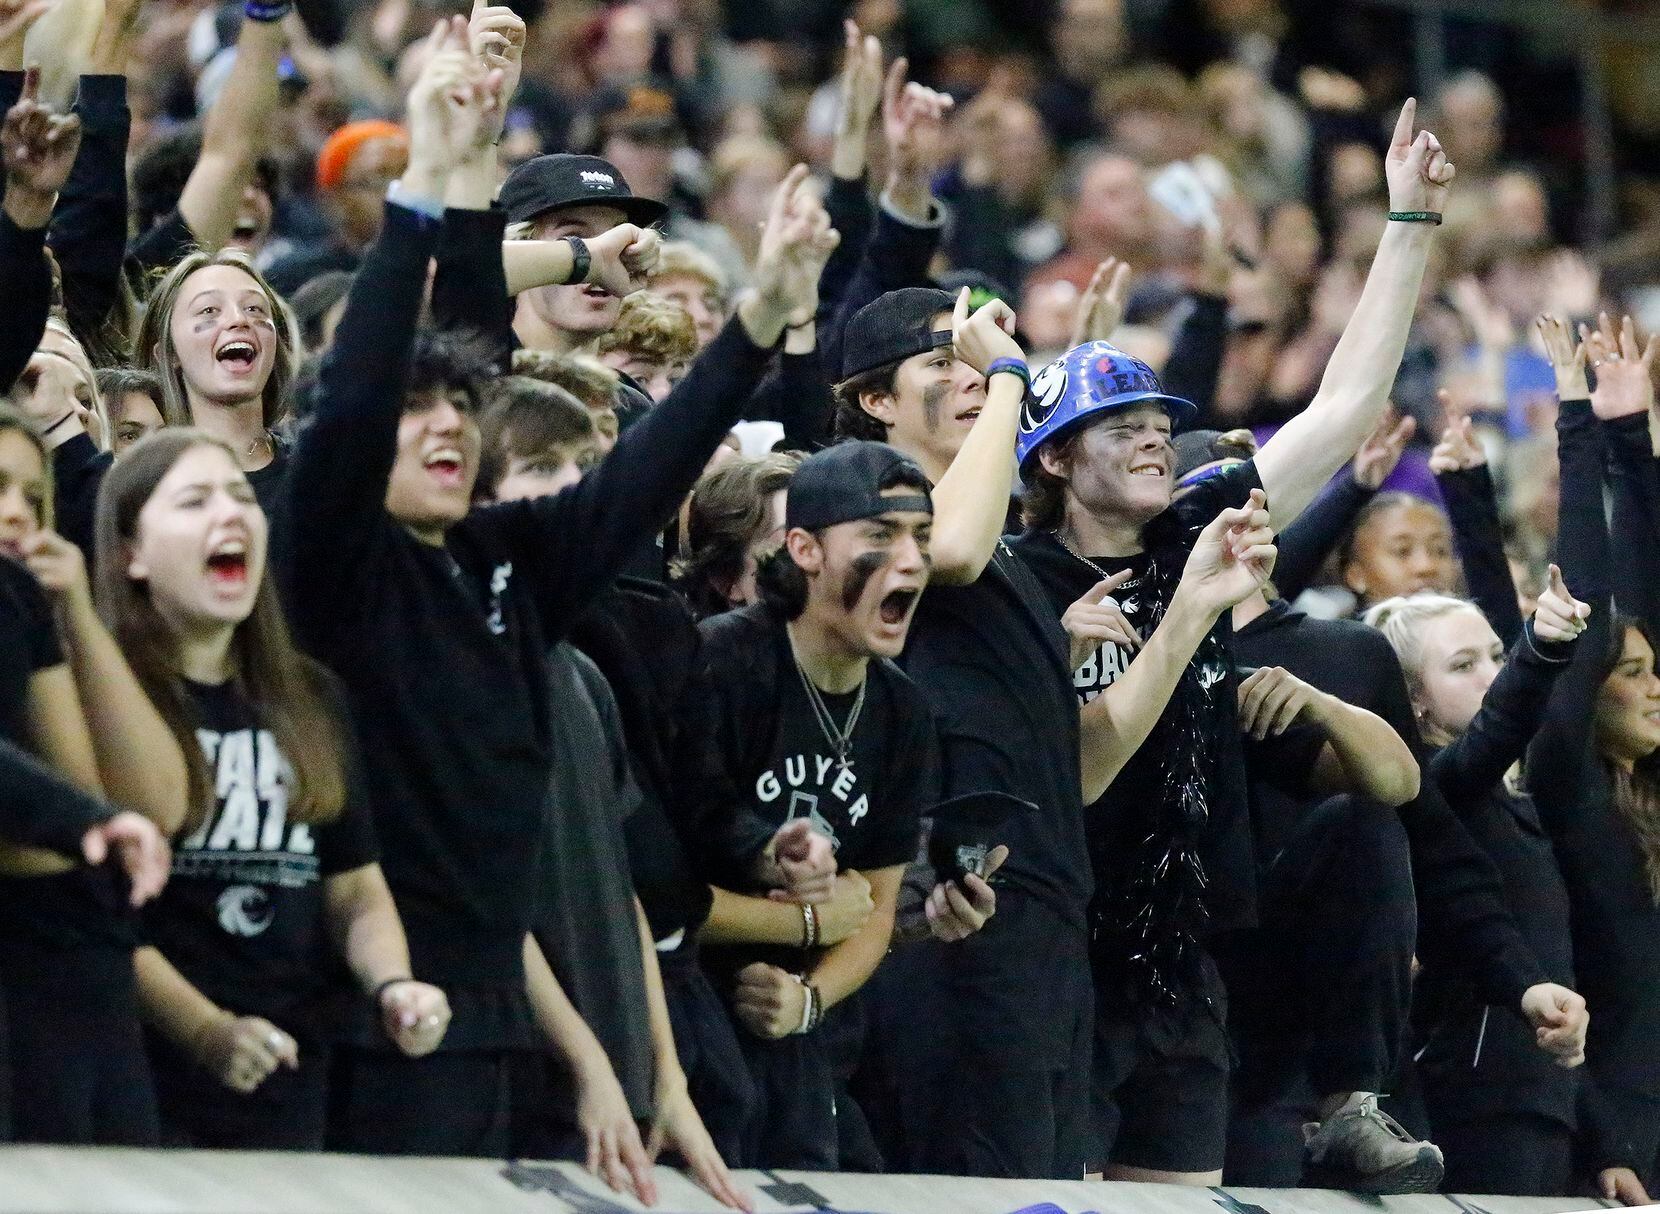 The Denton Guyer student section reacts to a first down which put the game away with little time remaining during the second half as Denton Guyer High School played Trophy Club Byron Nelson High School in a Class 6A Division II Region I semifinal football game at The Ford Center in Frisco on Saturday, November 27, 2021. (Stewart F. House/Special Contributor)